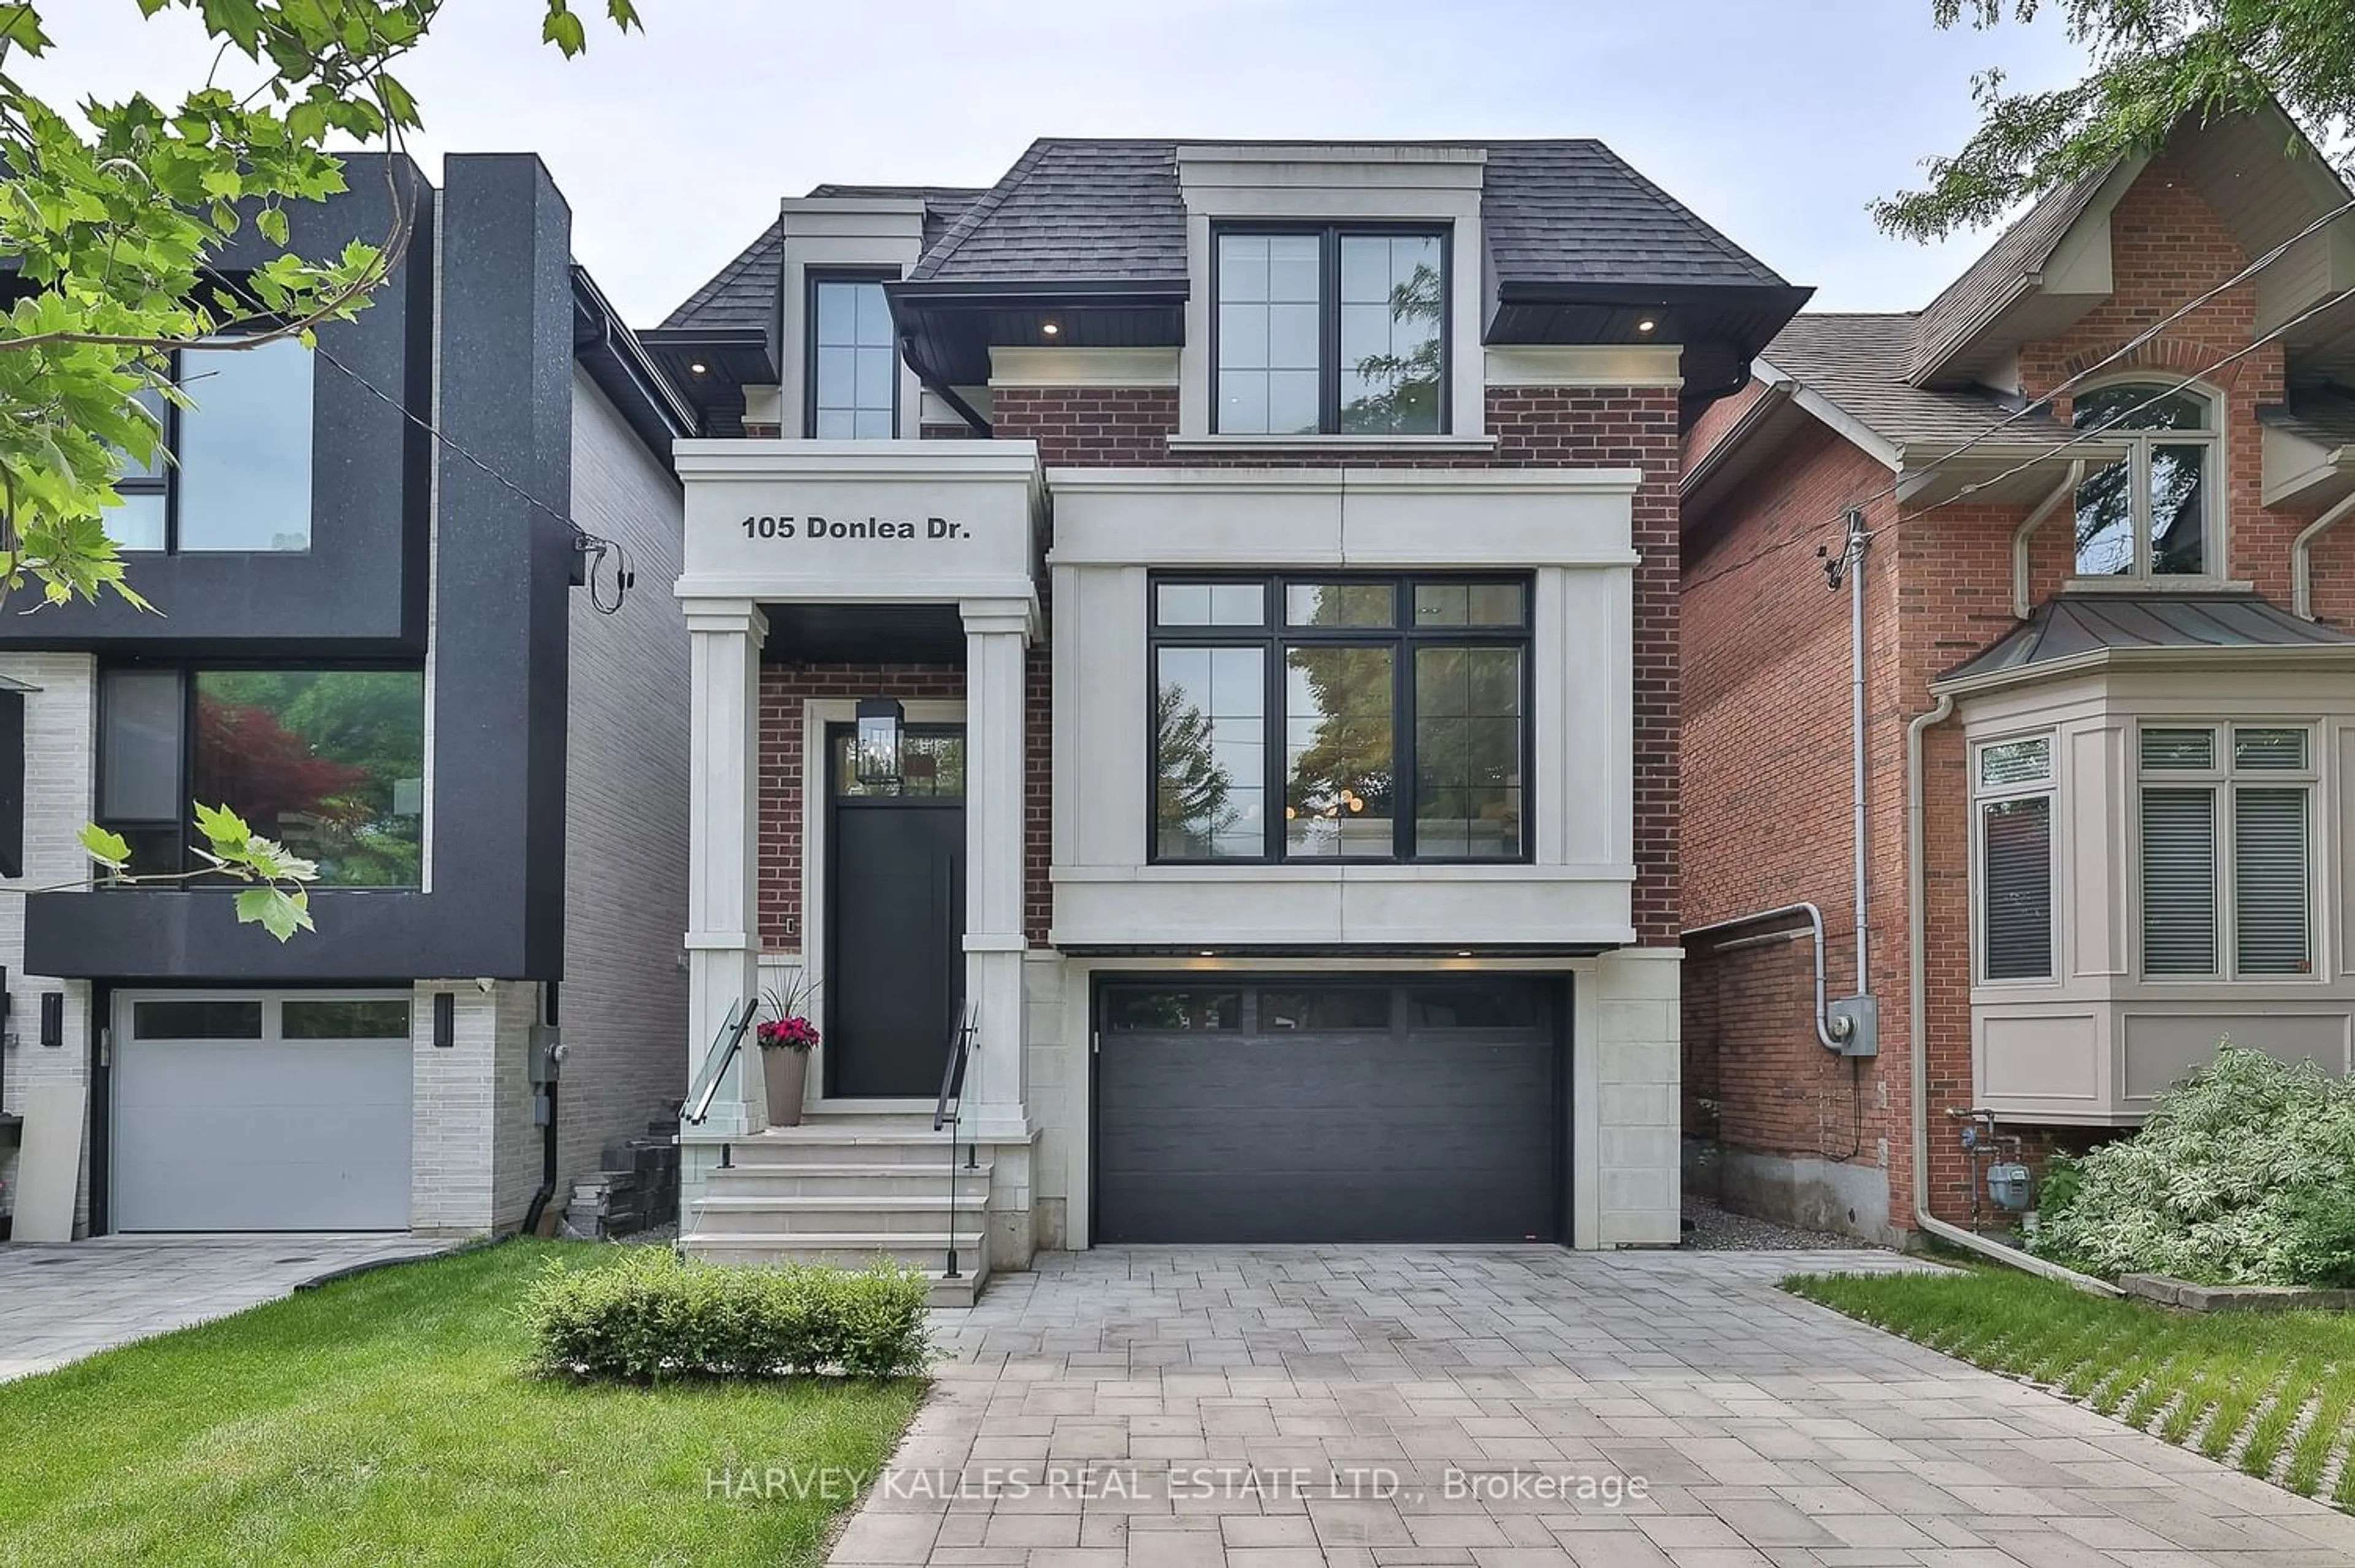 Home with brick exterior material for 105 Donlea Dr, Toronto Ontario M4G 2M6